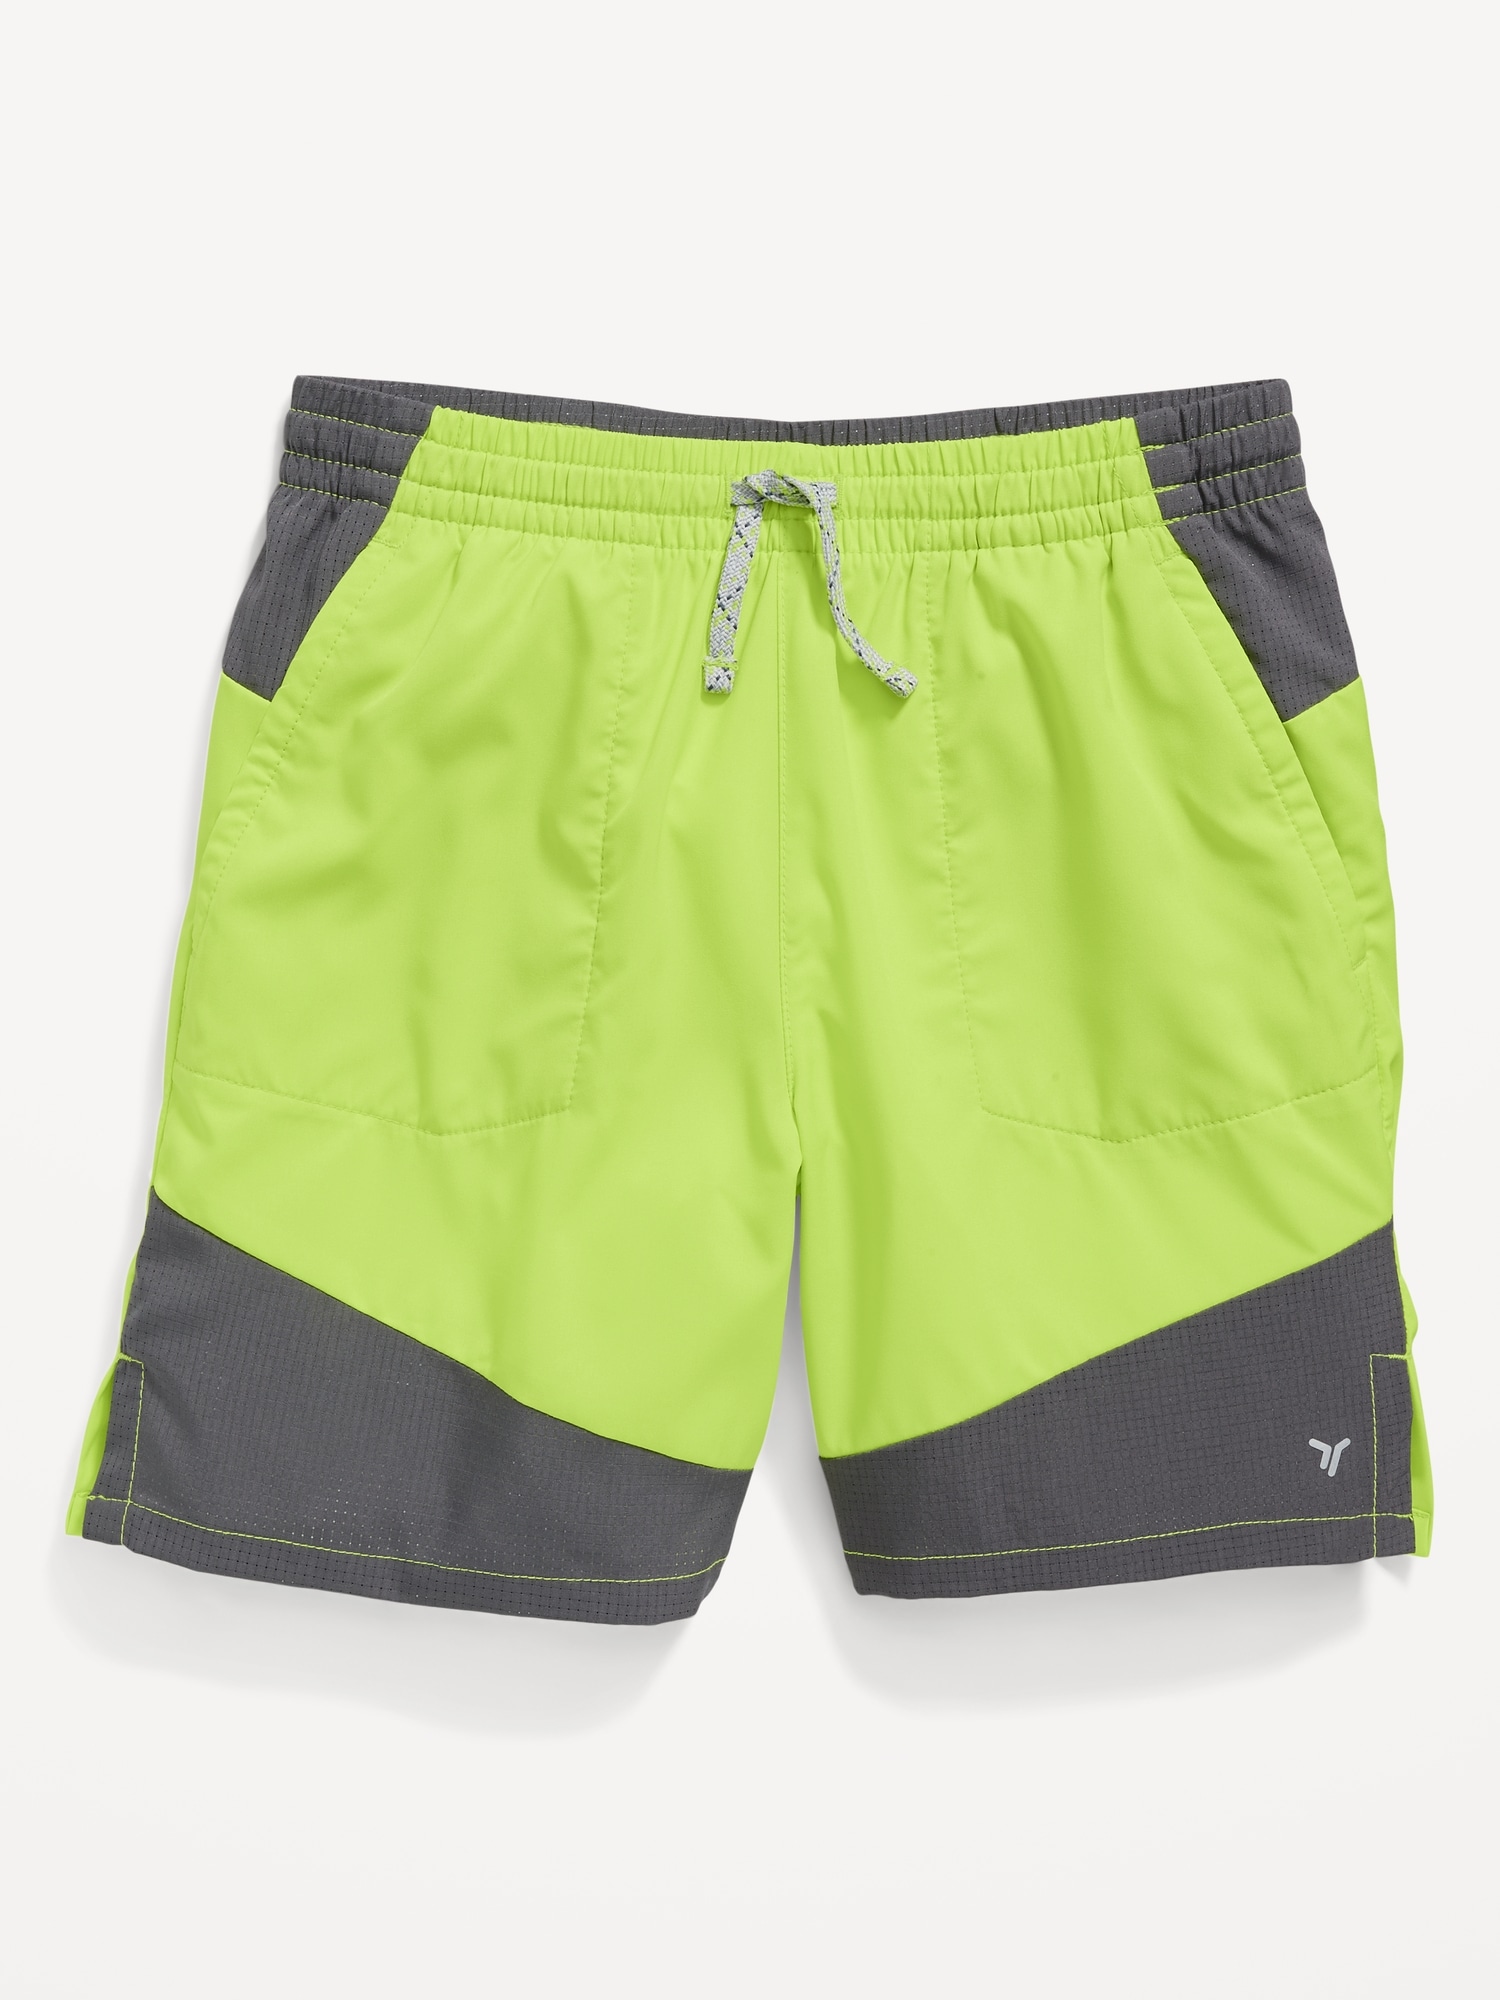 Old Navy StretchTech Performance Run Shorts for Boys (Above Knee) green. 1